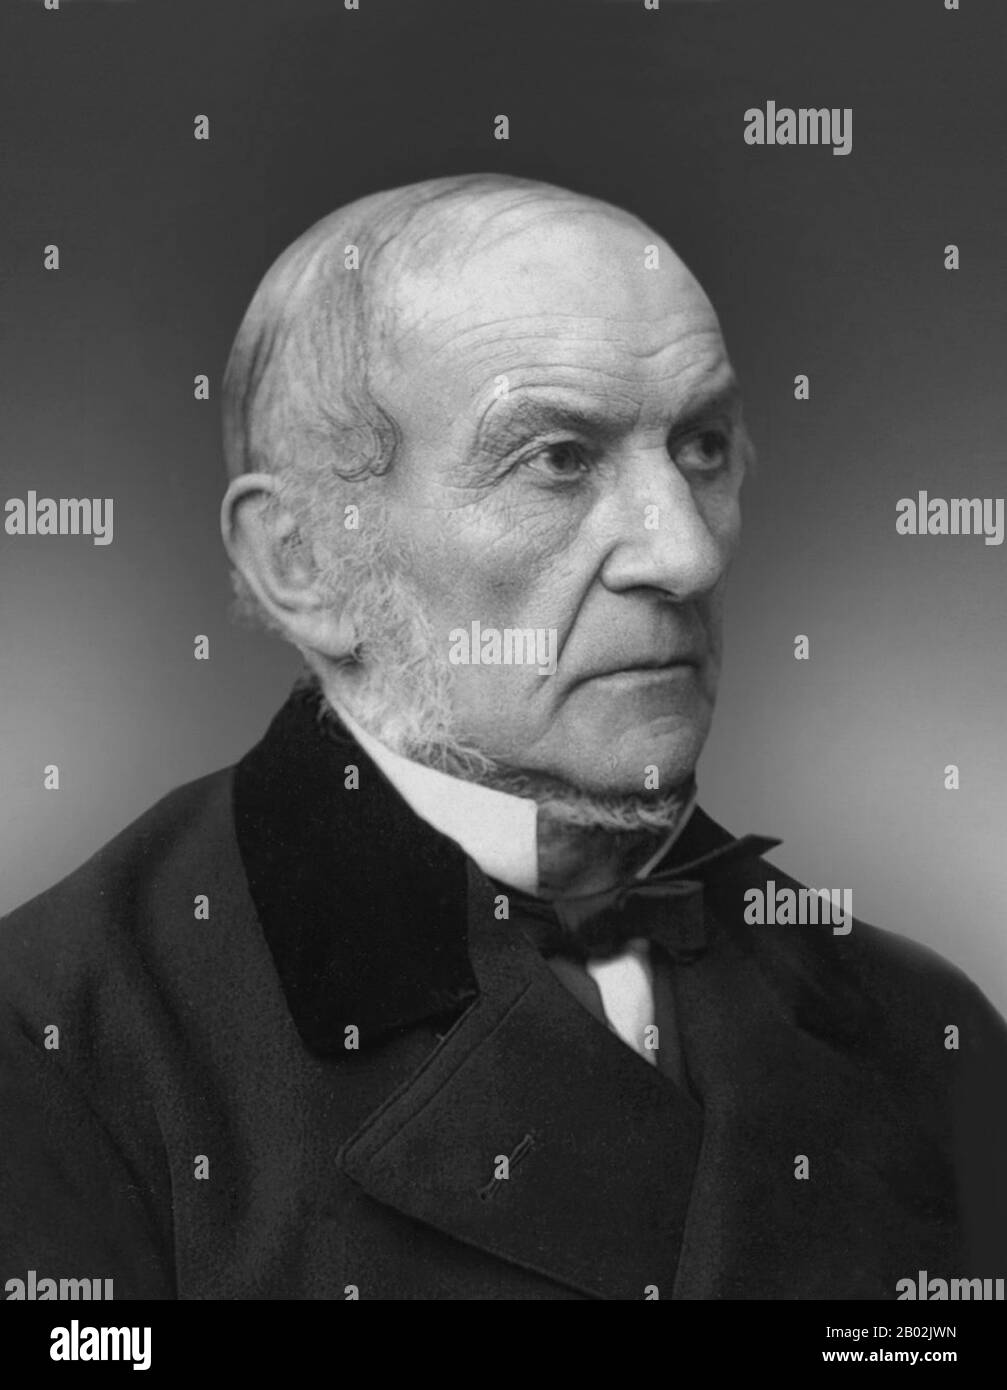 William Ewart Gladstone (29 December 1809 – 19 May 1898), was a British Liberal politician. In a career lasting over sixty years, he served as Prime Minister four separate times (1868–74, 1880–85, February–July 1886 and 1892–94), more than any other person, and served as Chancellor of the Exchequer four times. Gladstone was also Britain's oldest Prime Minister; he resigned for the final time when was 84 years old.  Gladstone is consistently ranked as one of Britain's greatest Prime Ministers. Stock Photo